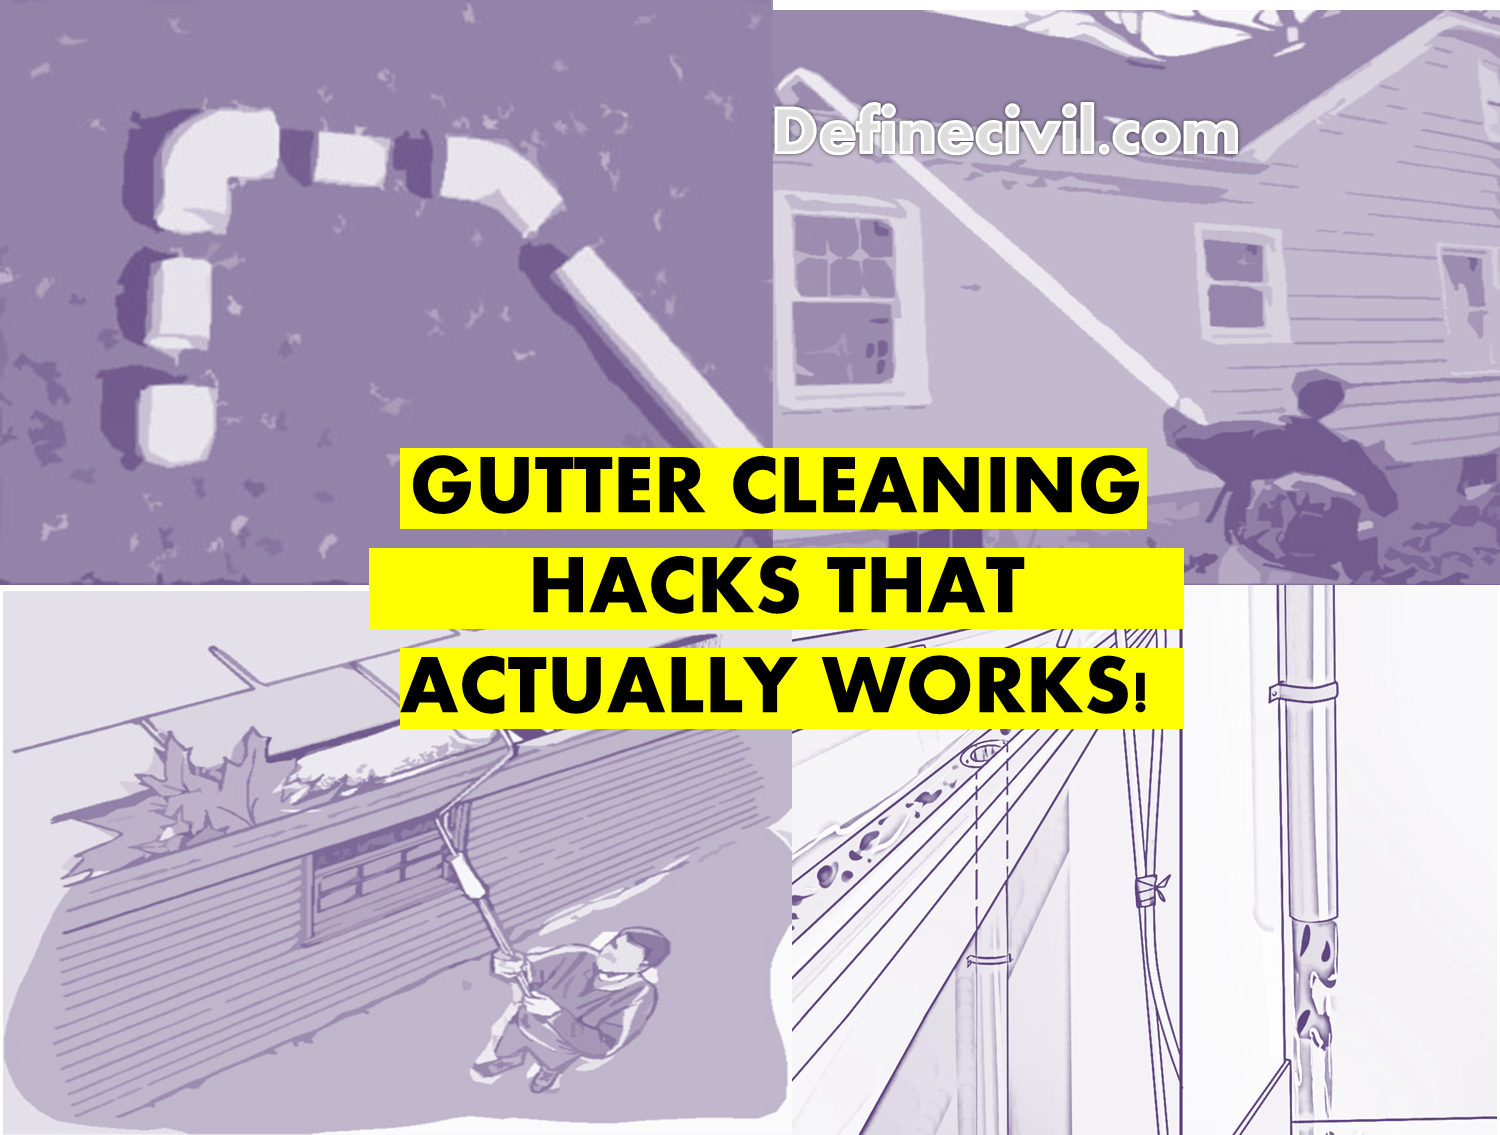 Gutter Cleaning Hacks that actually works